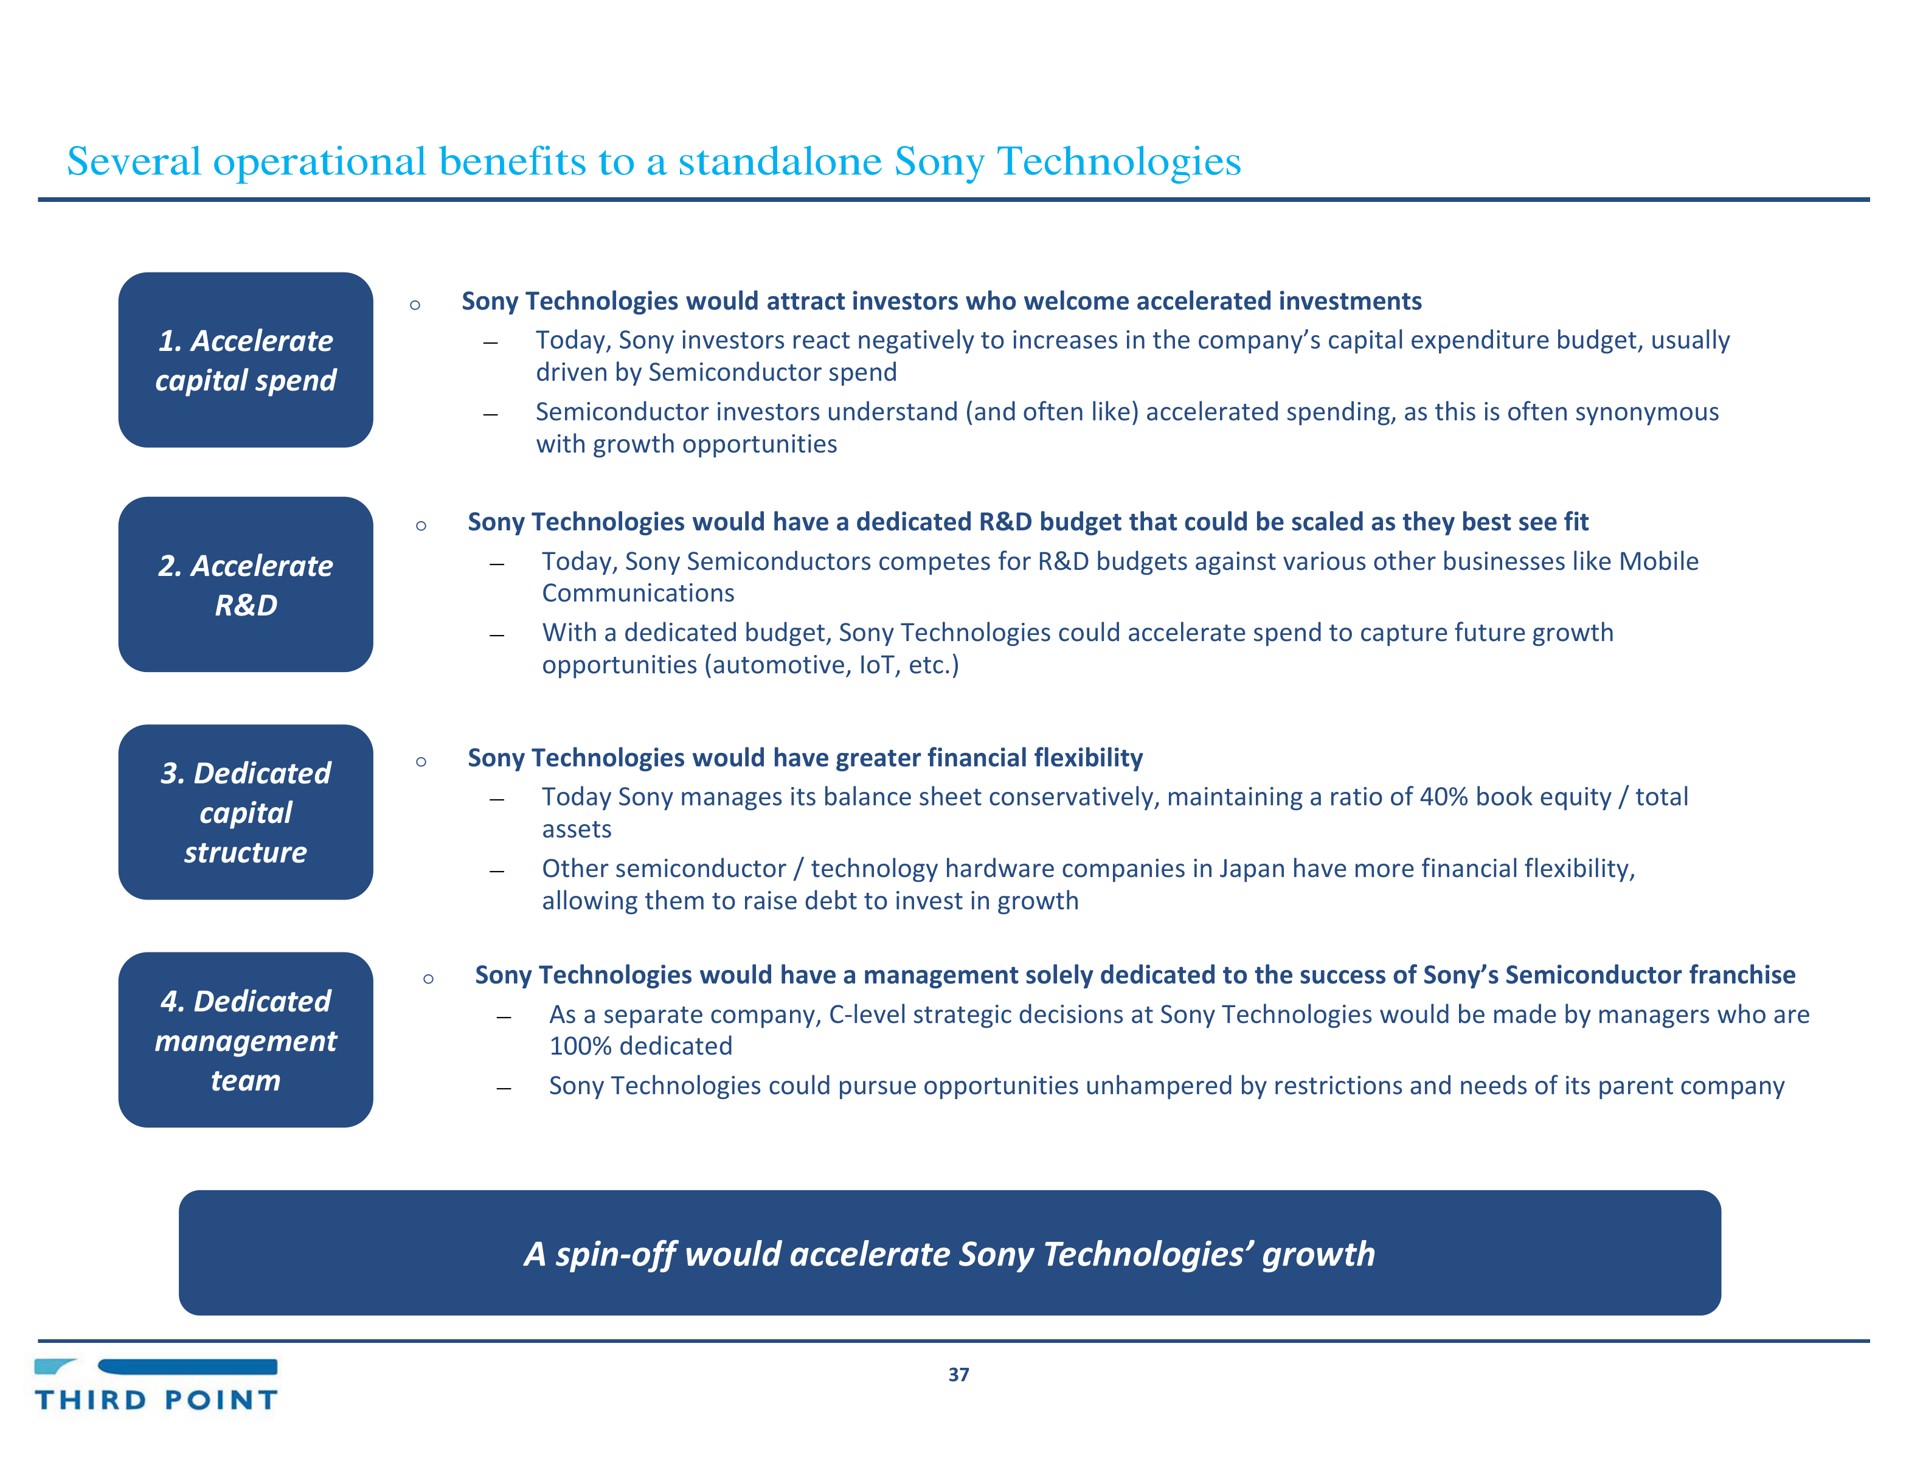 several operational benefits to a technologies accelerate capital spend accelerate dedicated capital structure dedicated management team a spin off would accelerate technologies growth spin off | Third Point Management